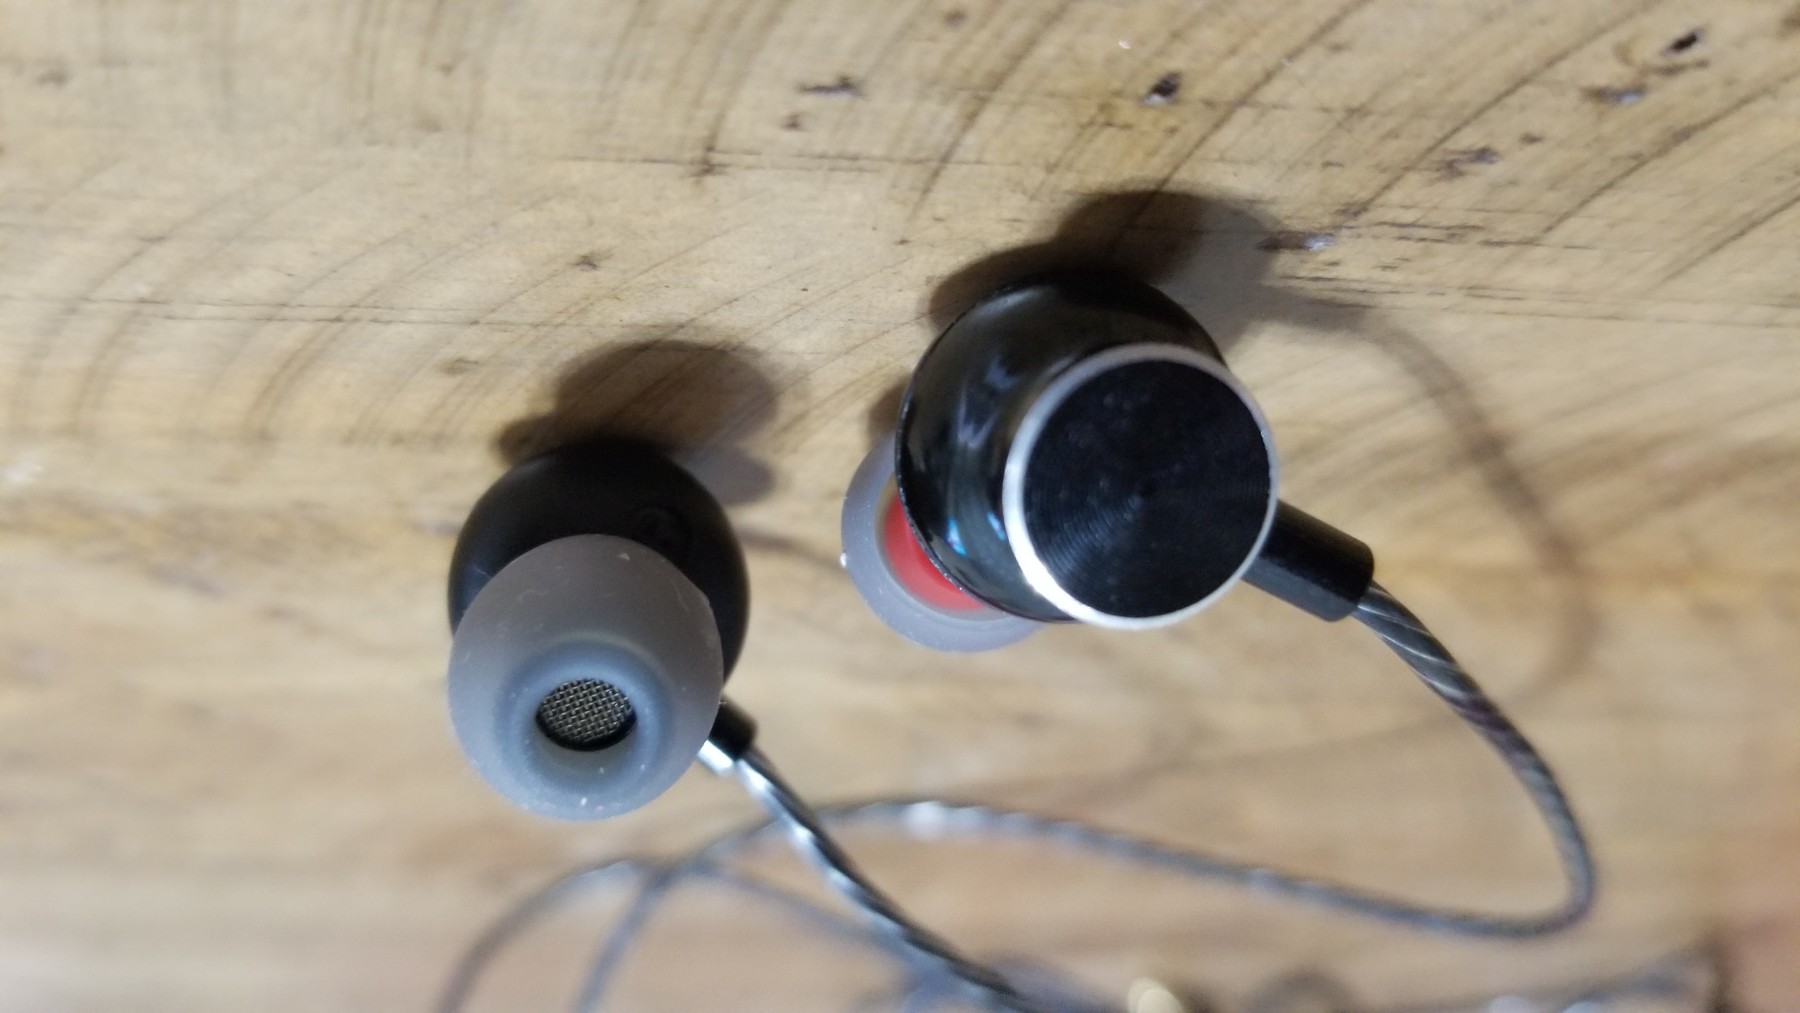 Restocking earbuds with great ones